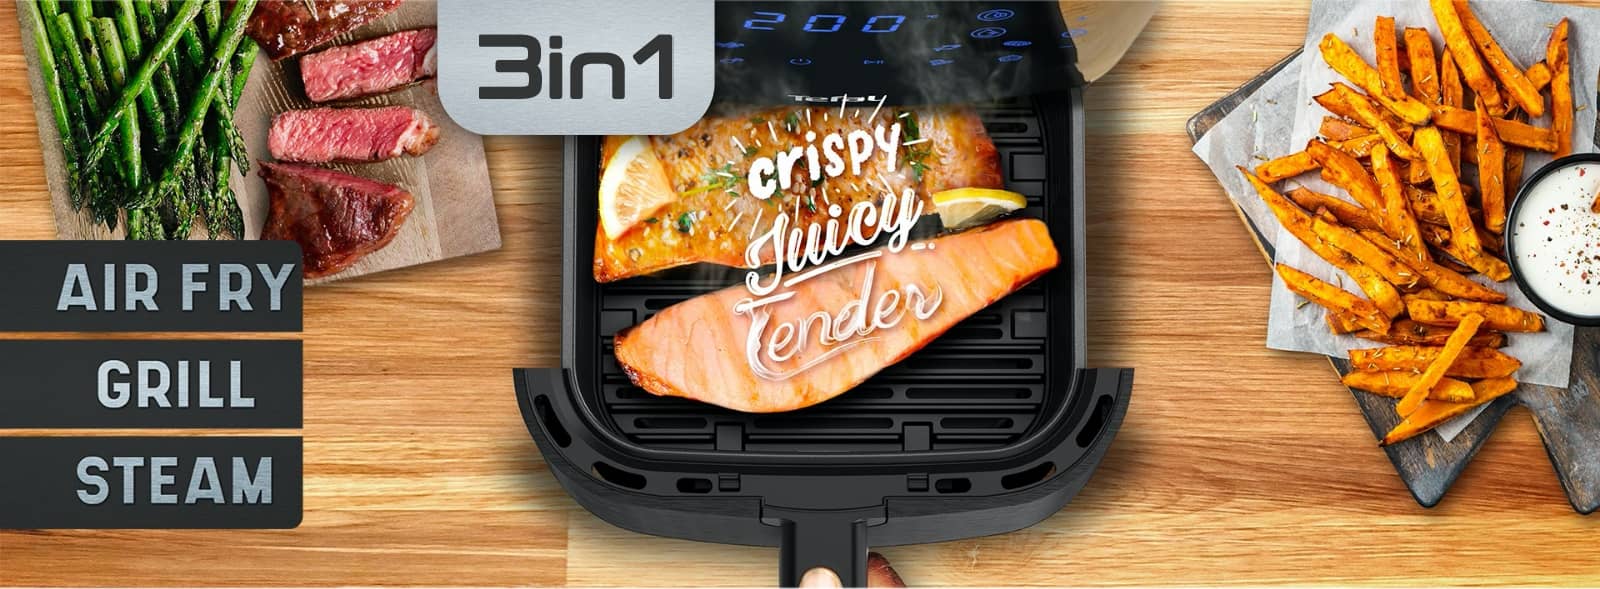 EasyFry 3in1 Air Fryer, Grill and Steam, grilling salmon and air fried chips